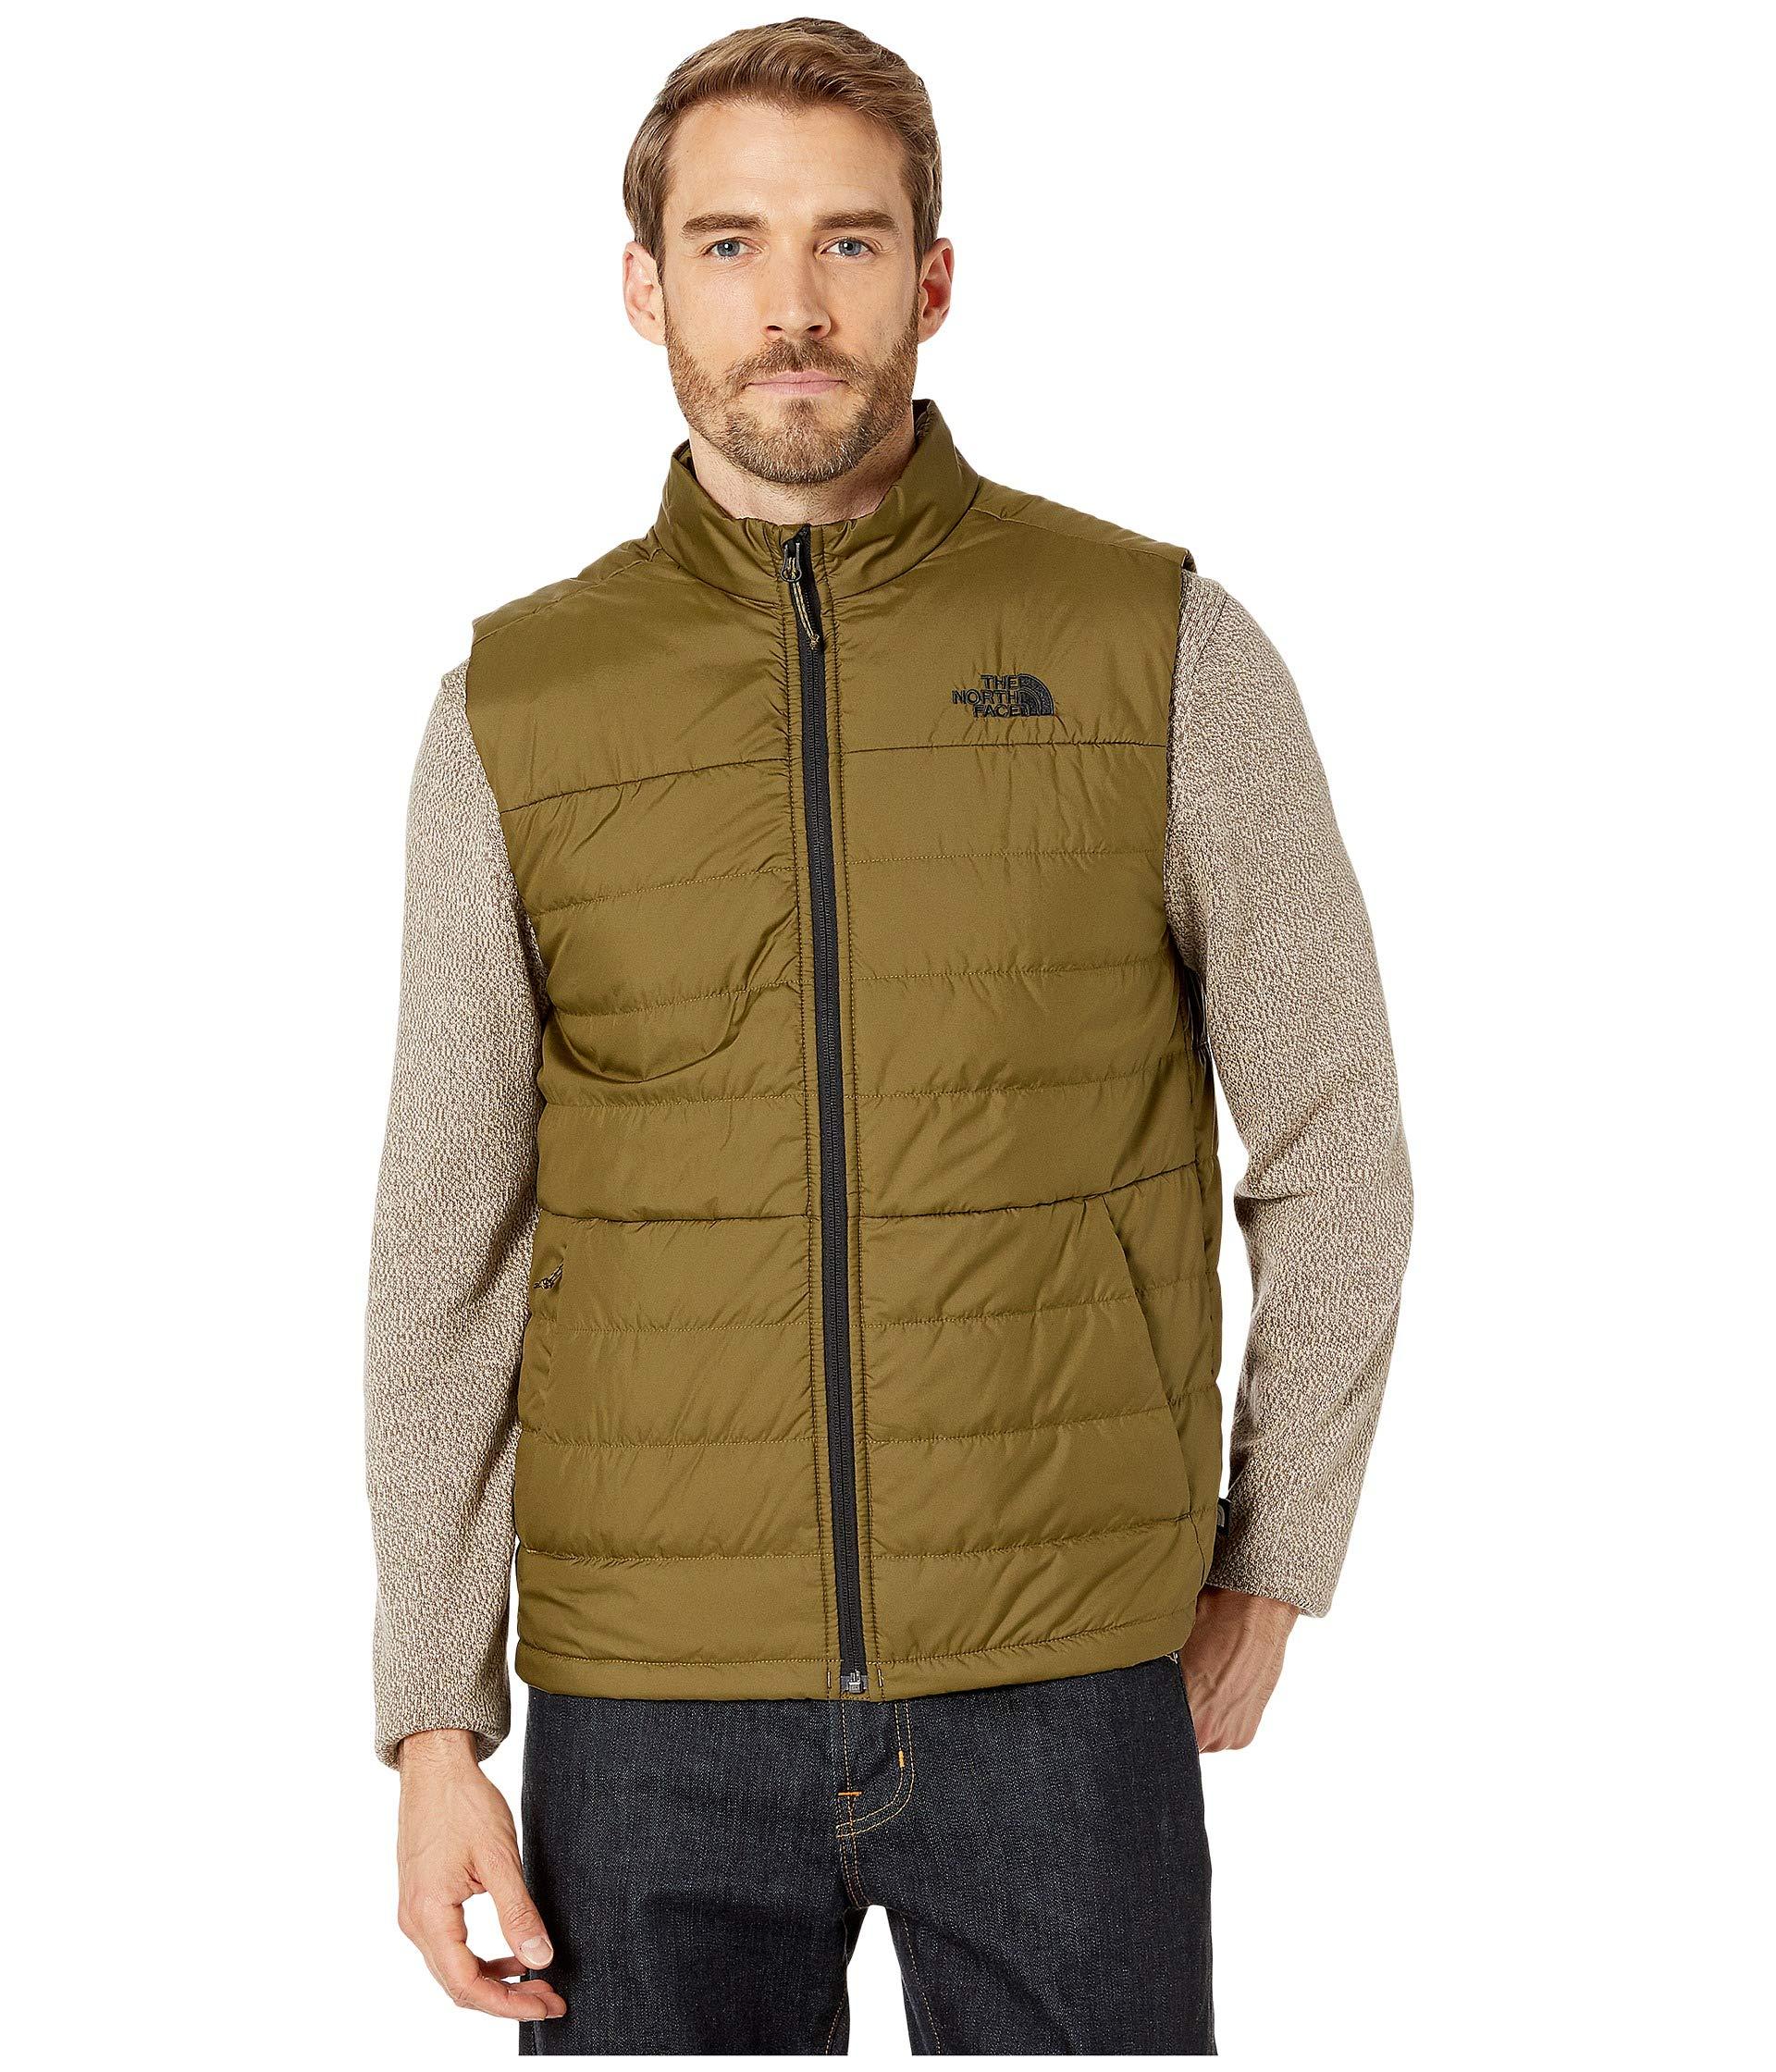 the north face bombay vest